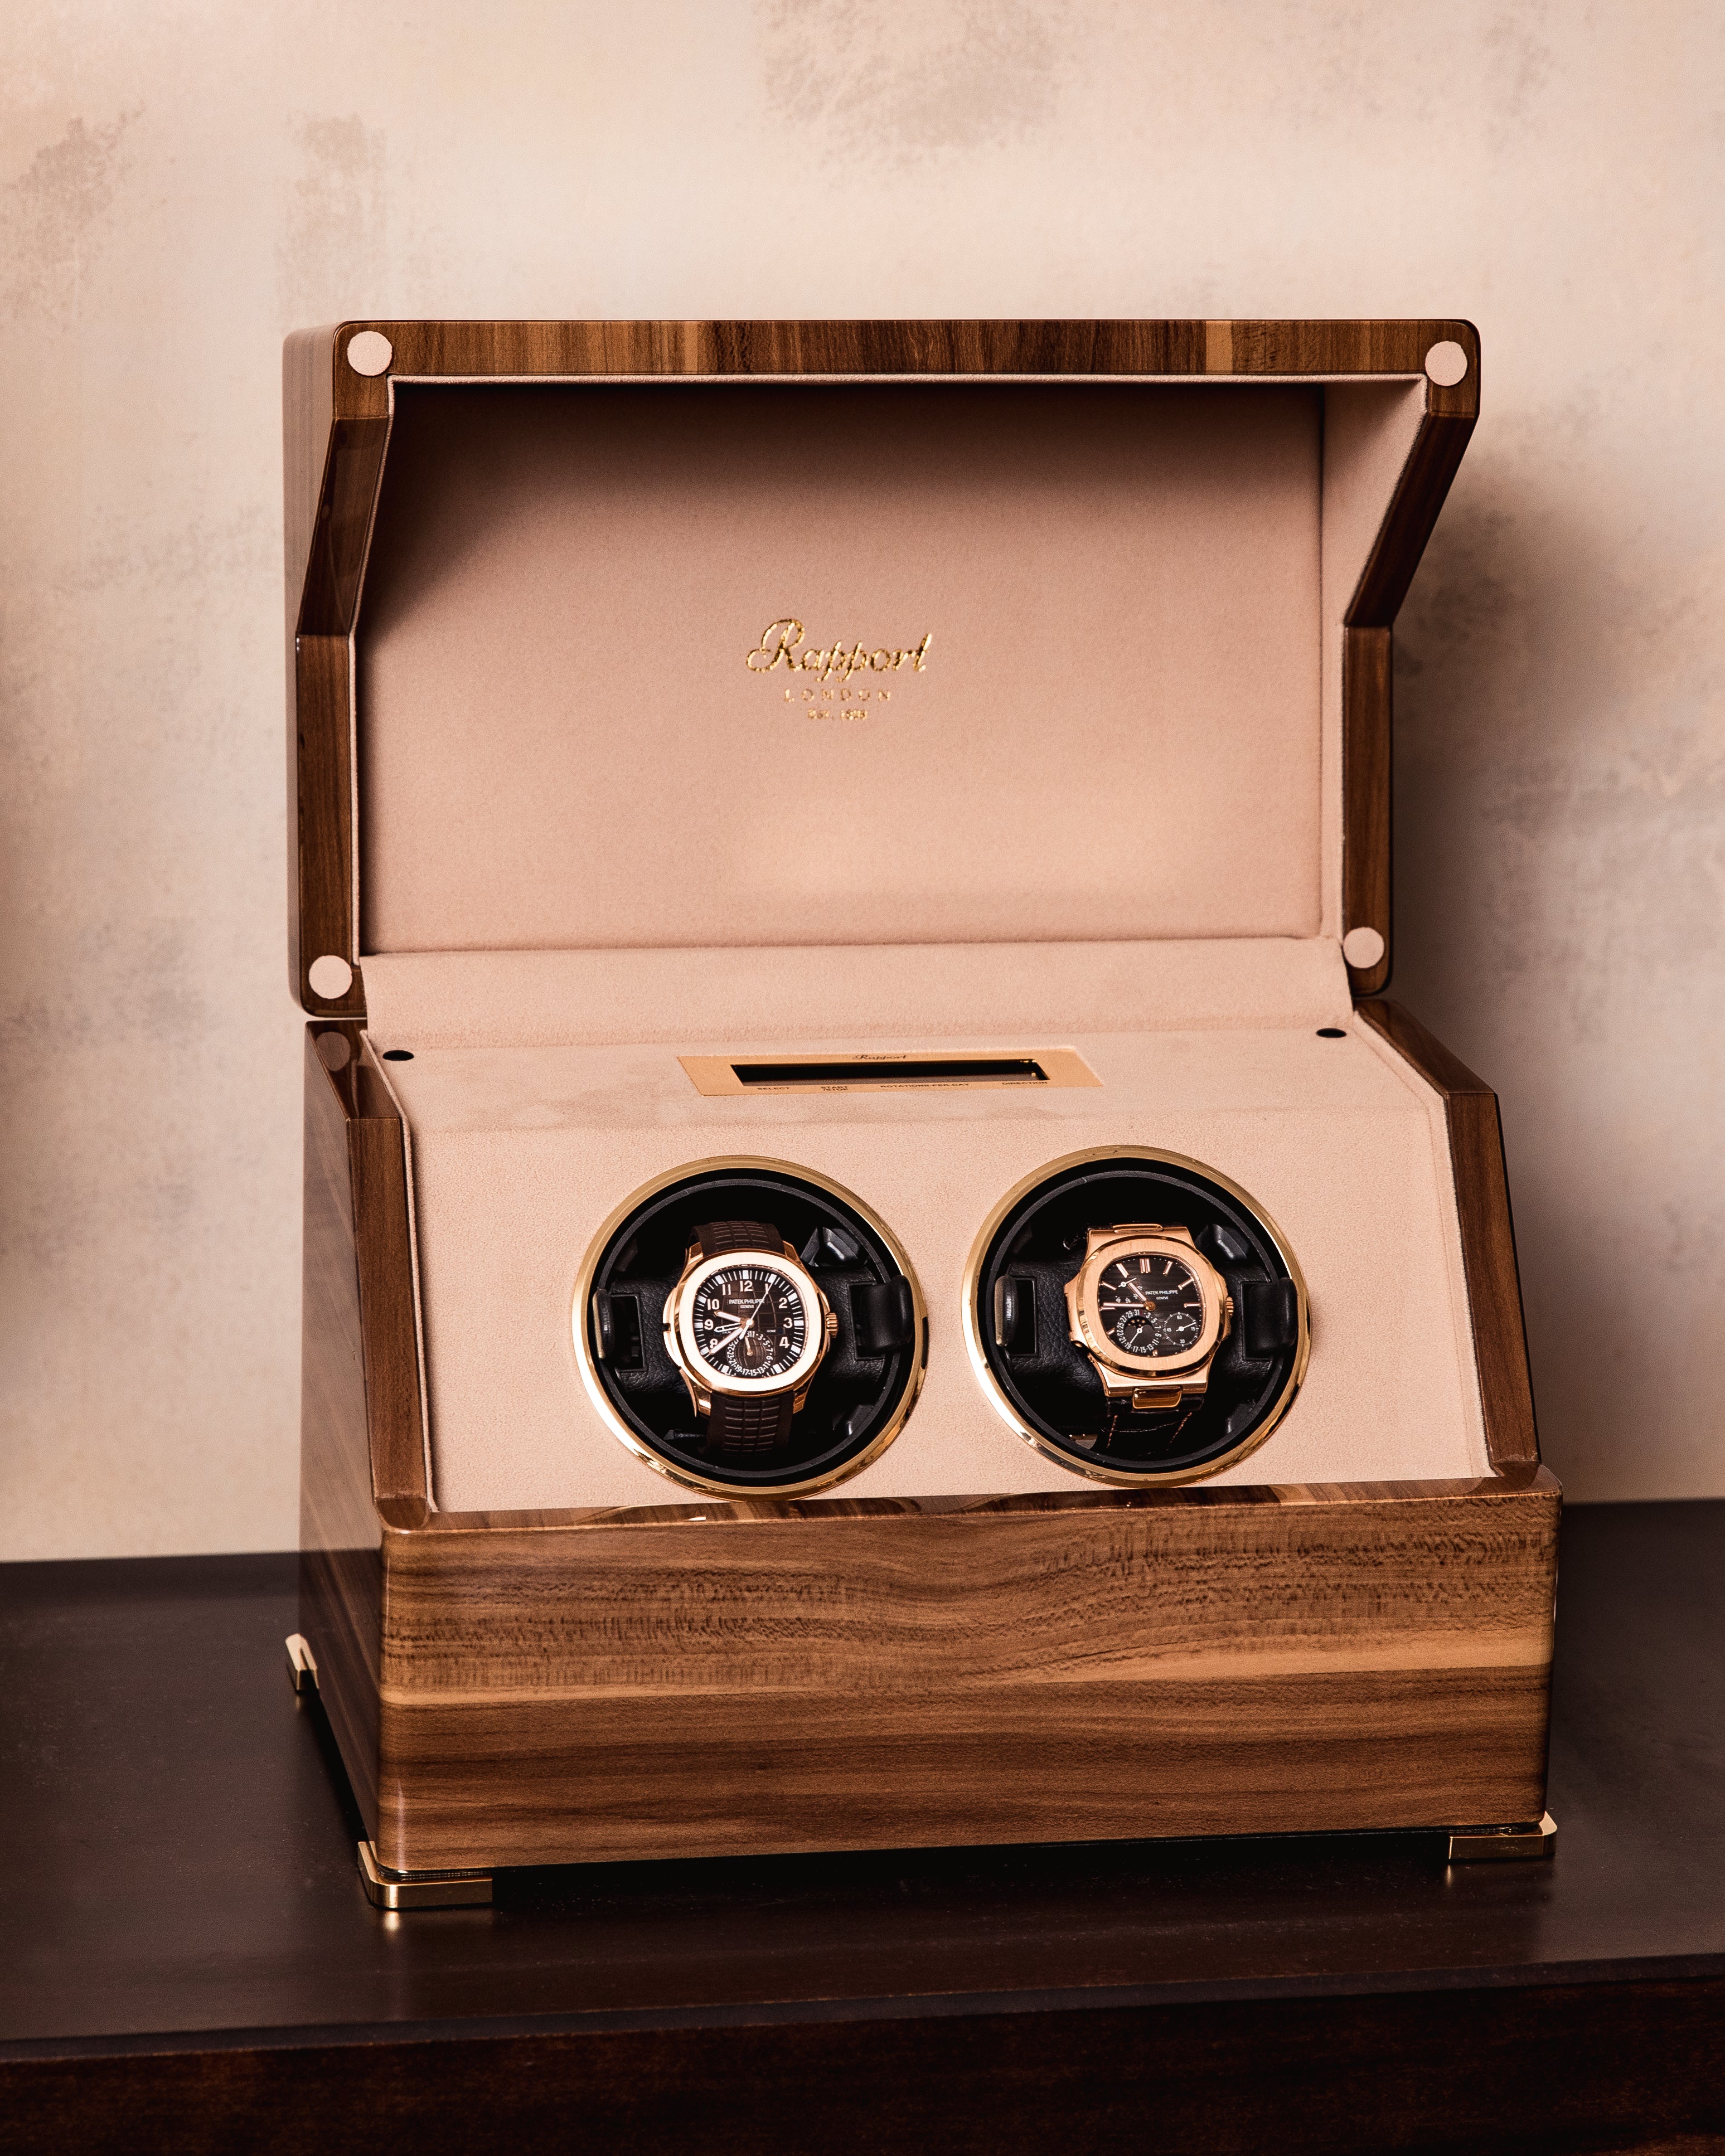 Article: How to Use a Watch Winder